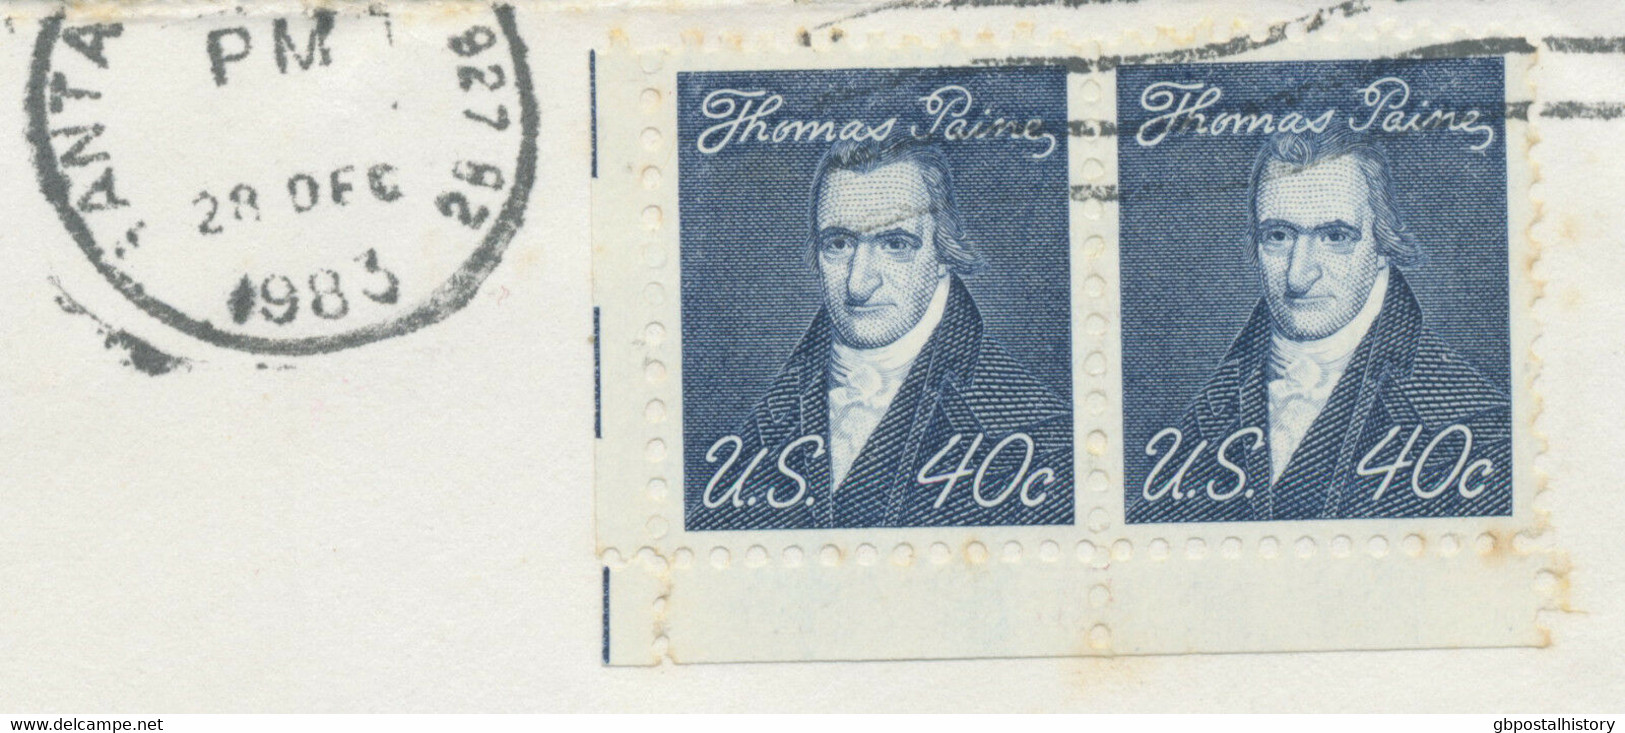 USA 1983, Thomas Paine 40 C Multiple Postage On Superb Air Mail Cover To Germany - Brieven En Documenten